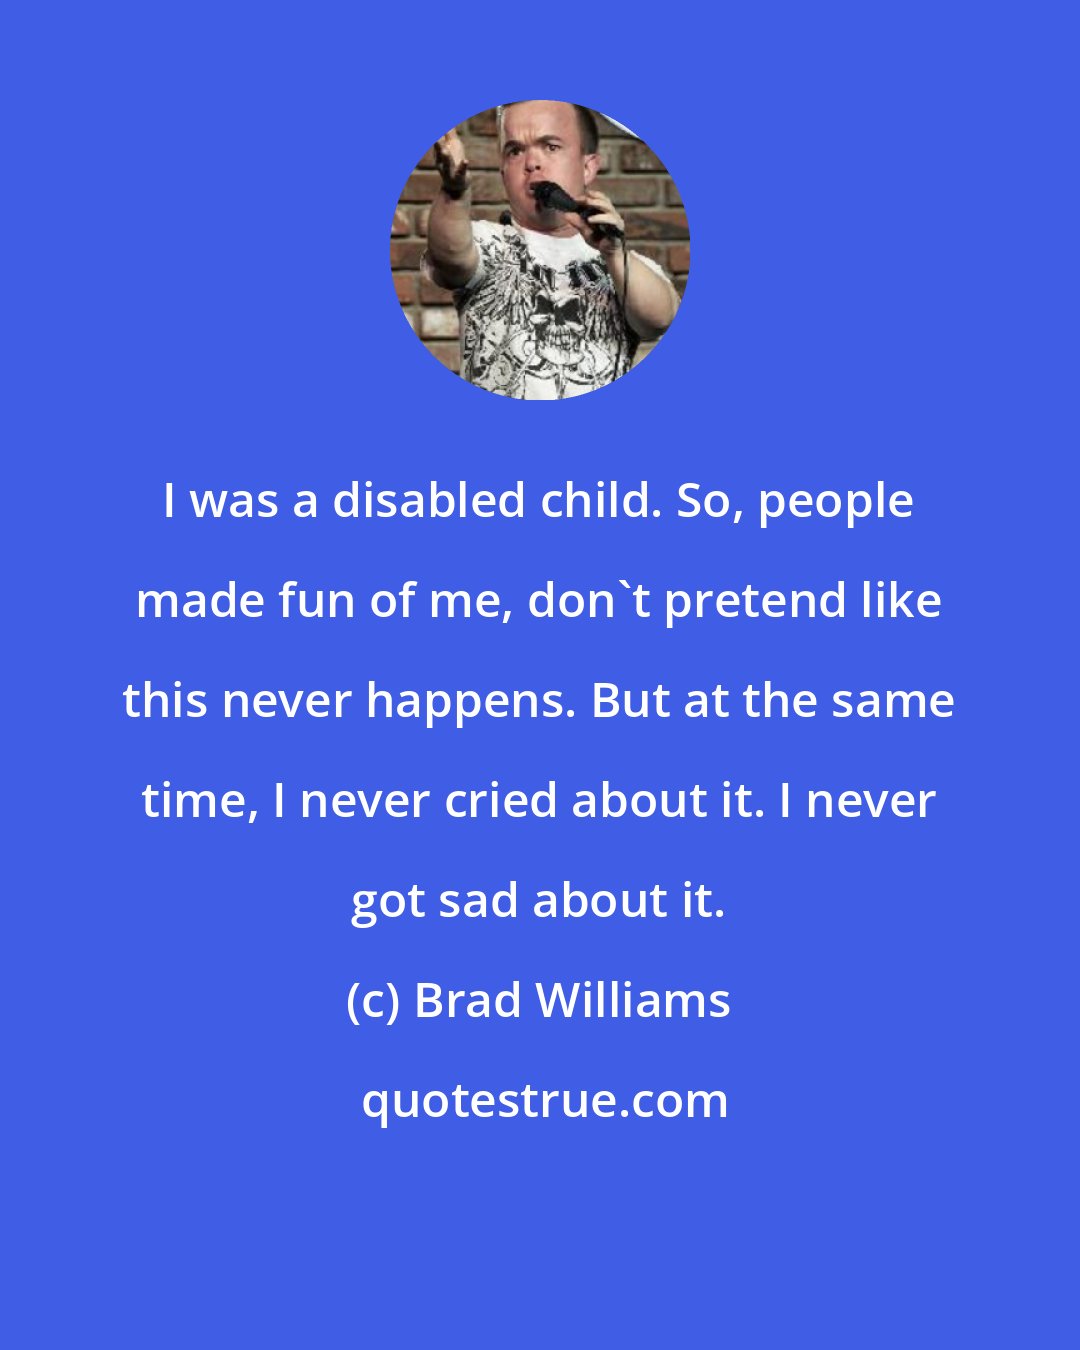 Brad Williams: I was a disabled child. So, people made fun of me, don't pretend like this never happens. But at the same time, I never cried about it. I never got sad about it.